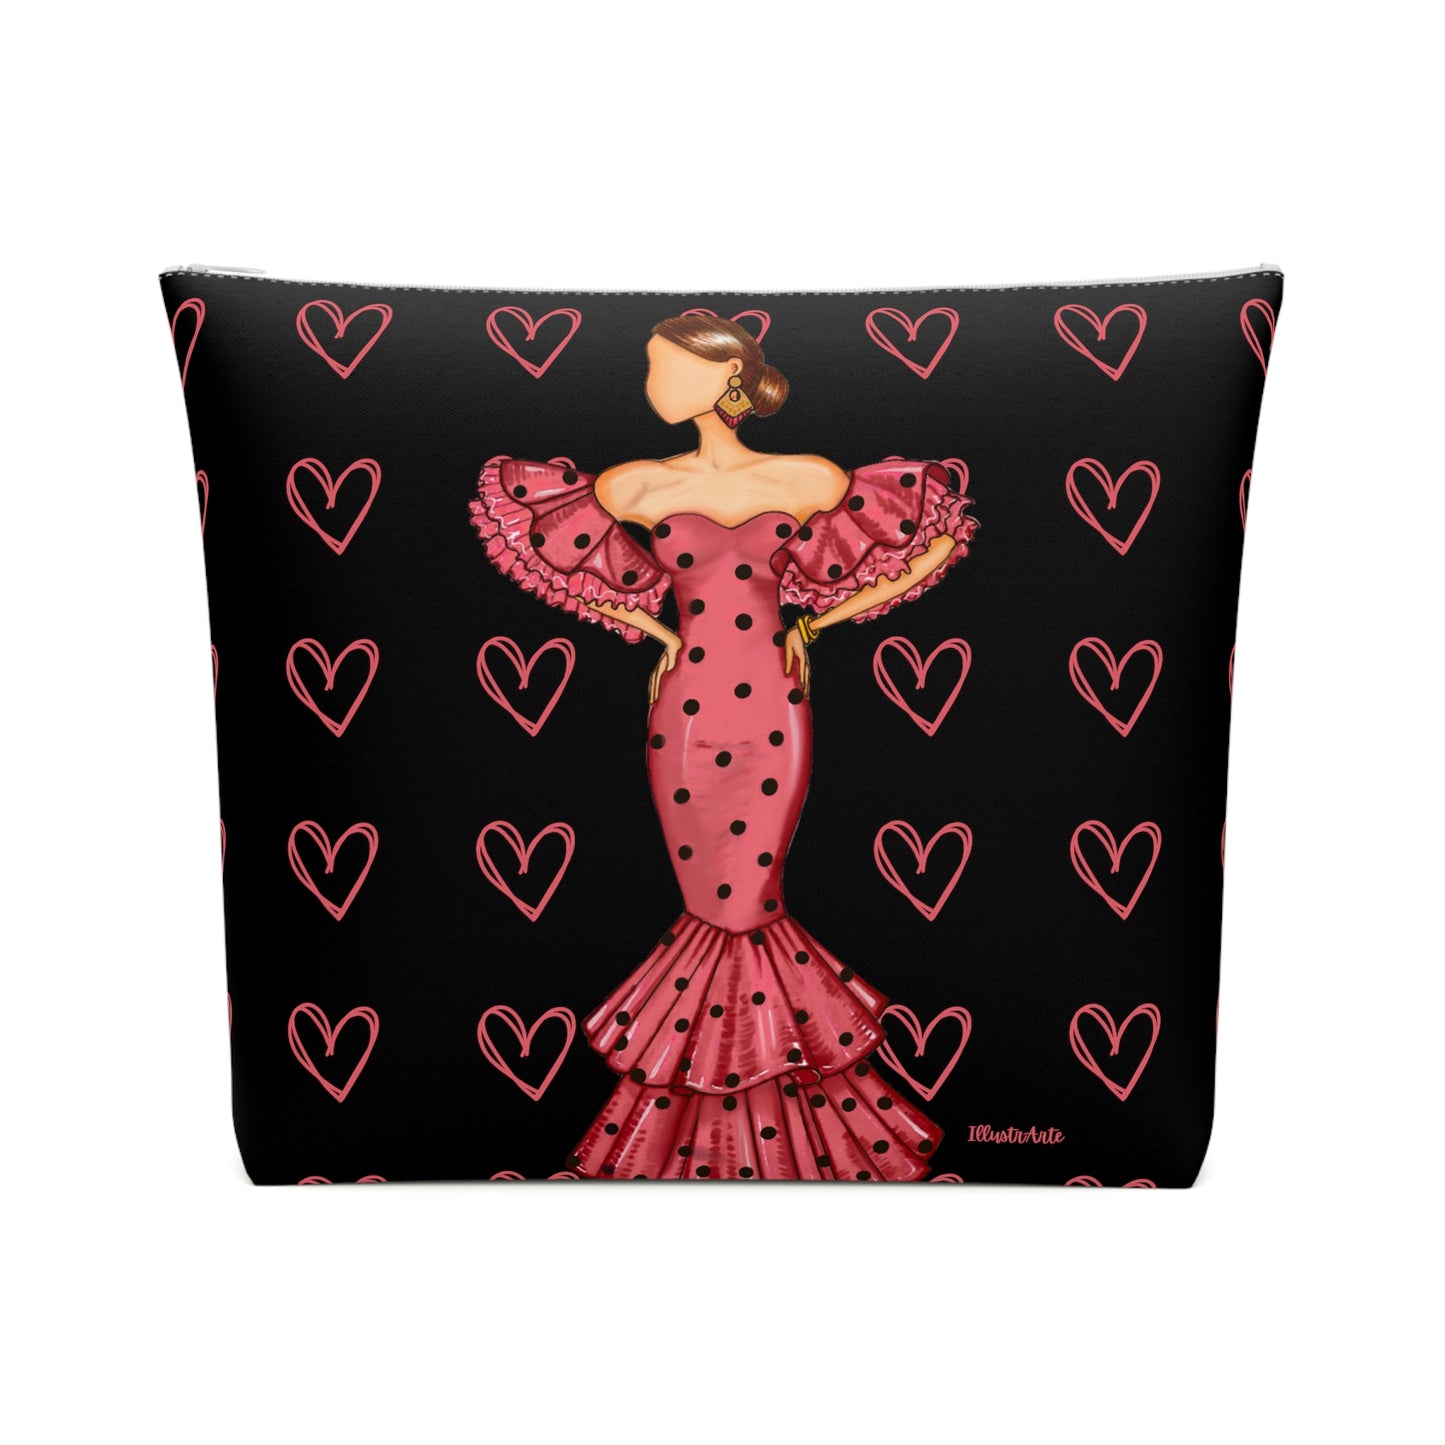 a black and red pillow with a woman in a pink dress